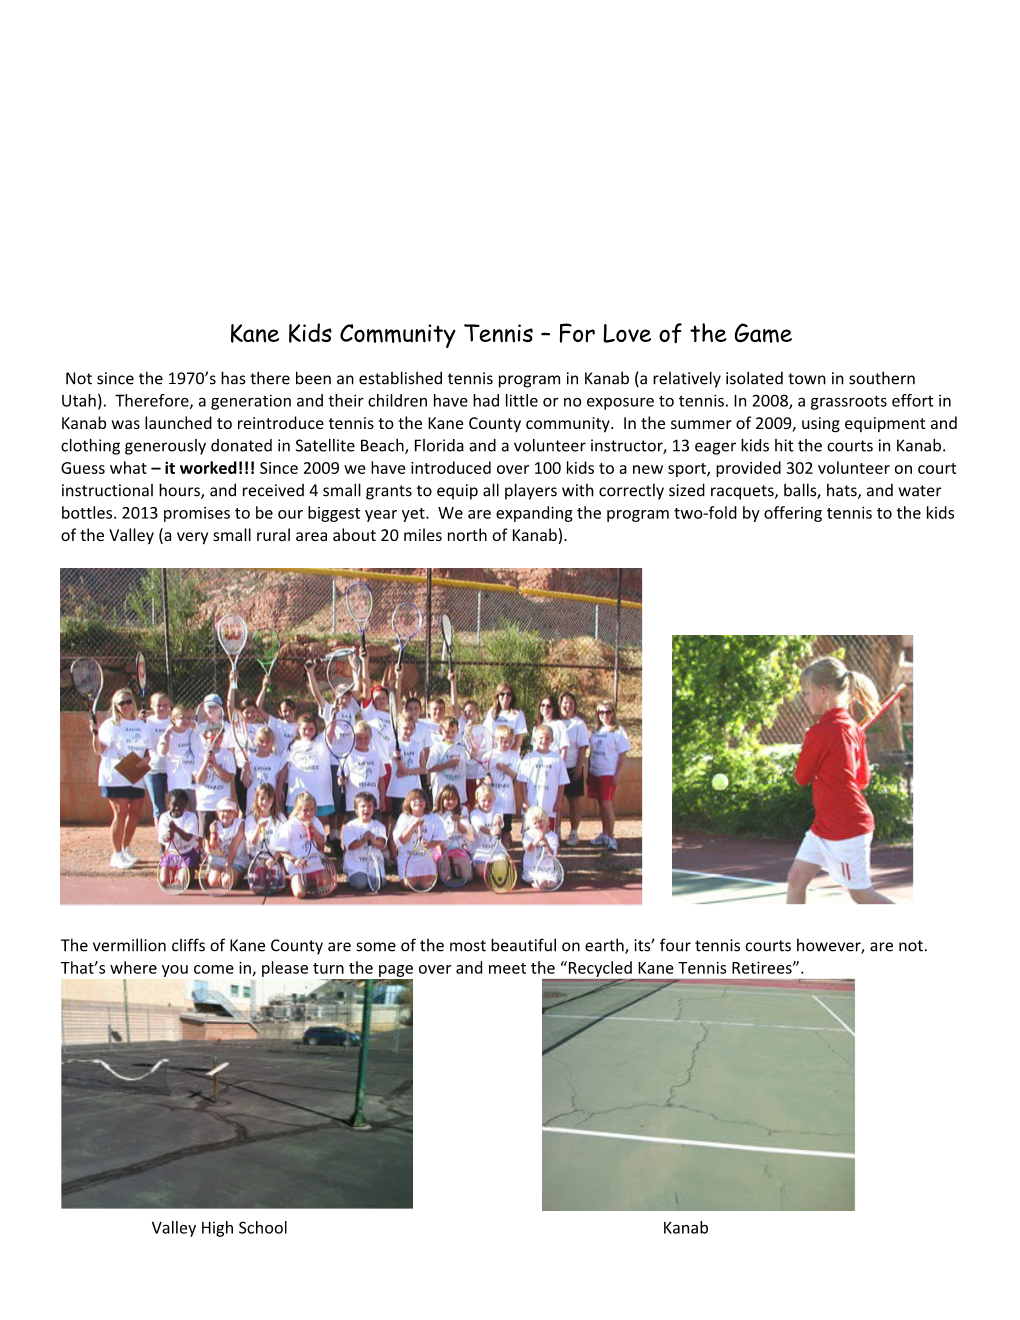 Kane Kids Community Tennis for Love of the Game